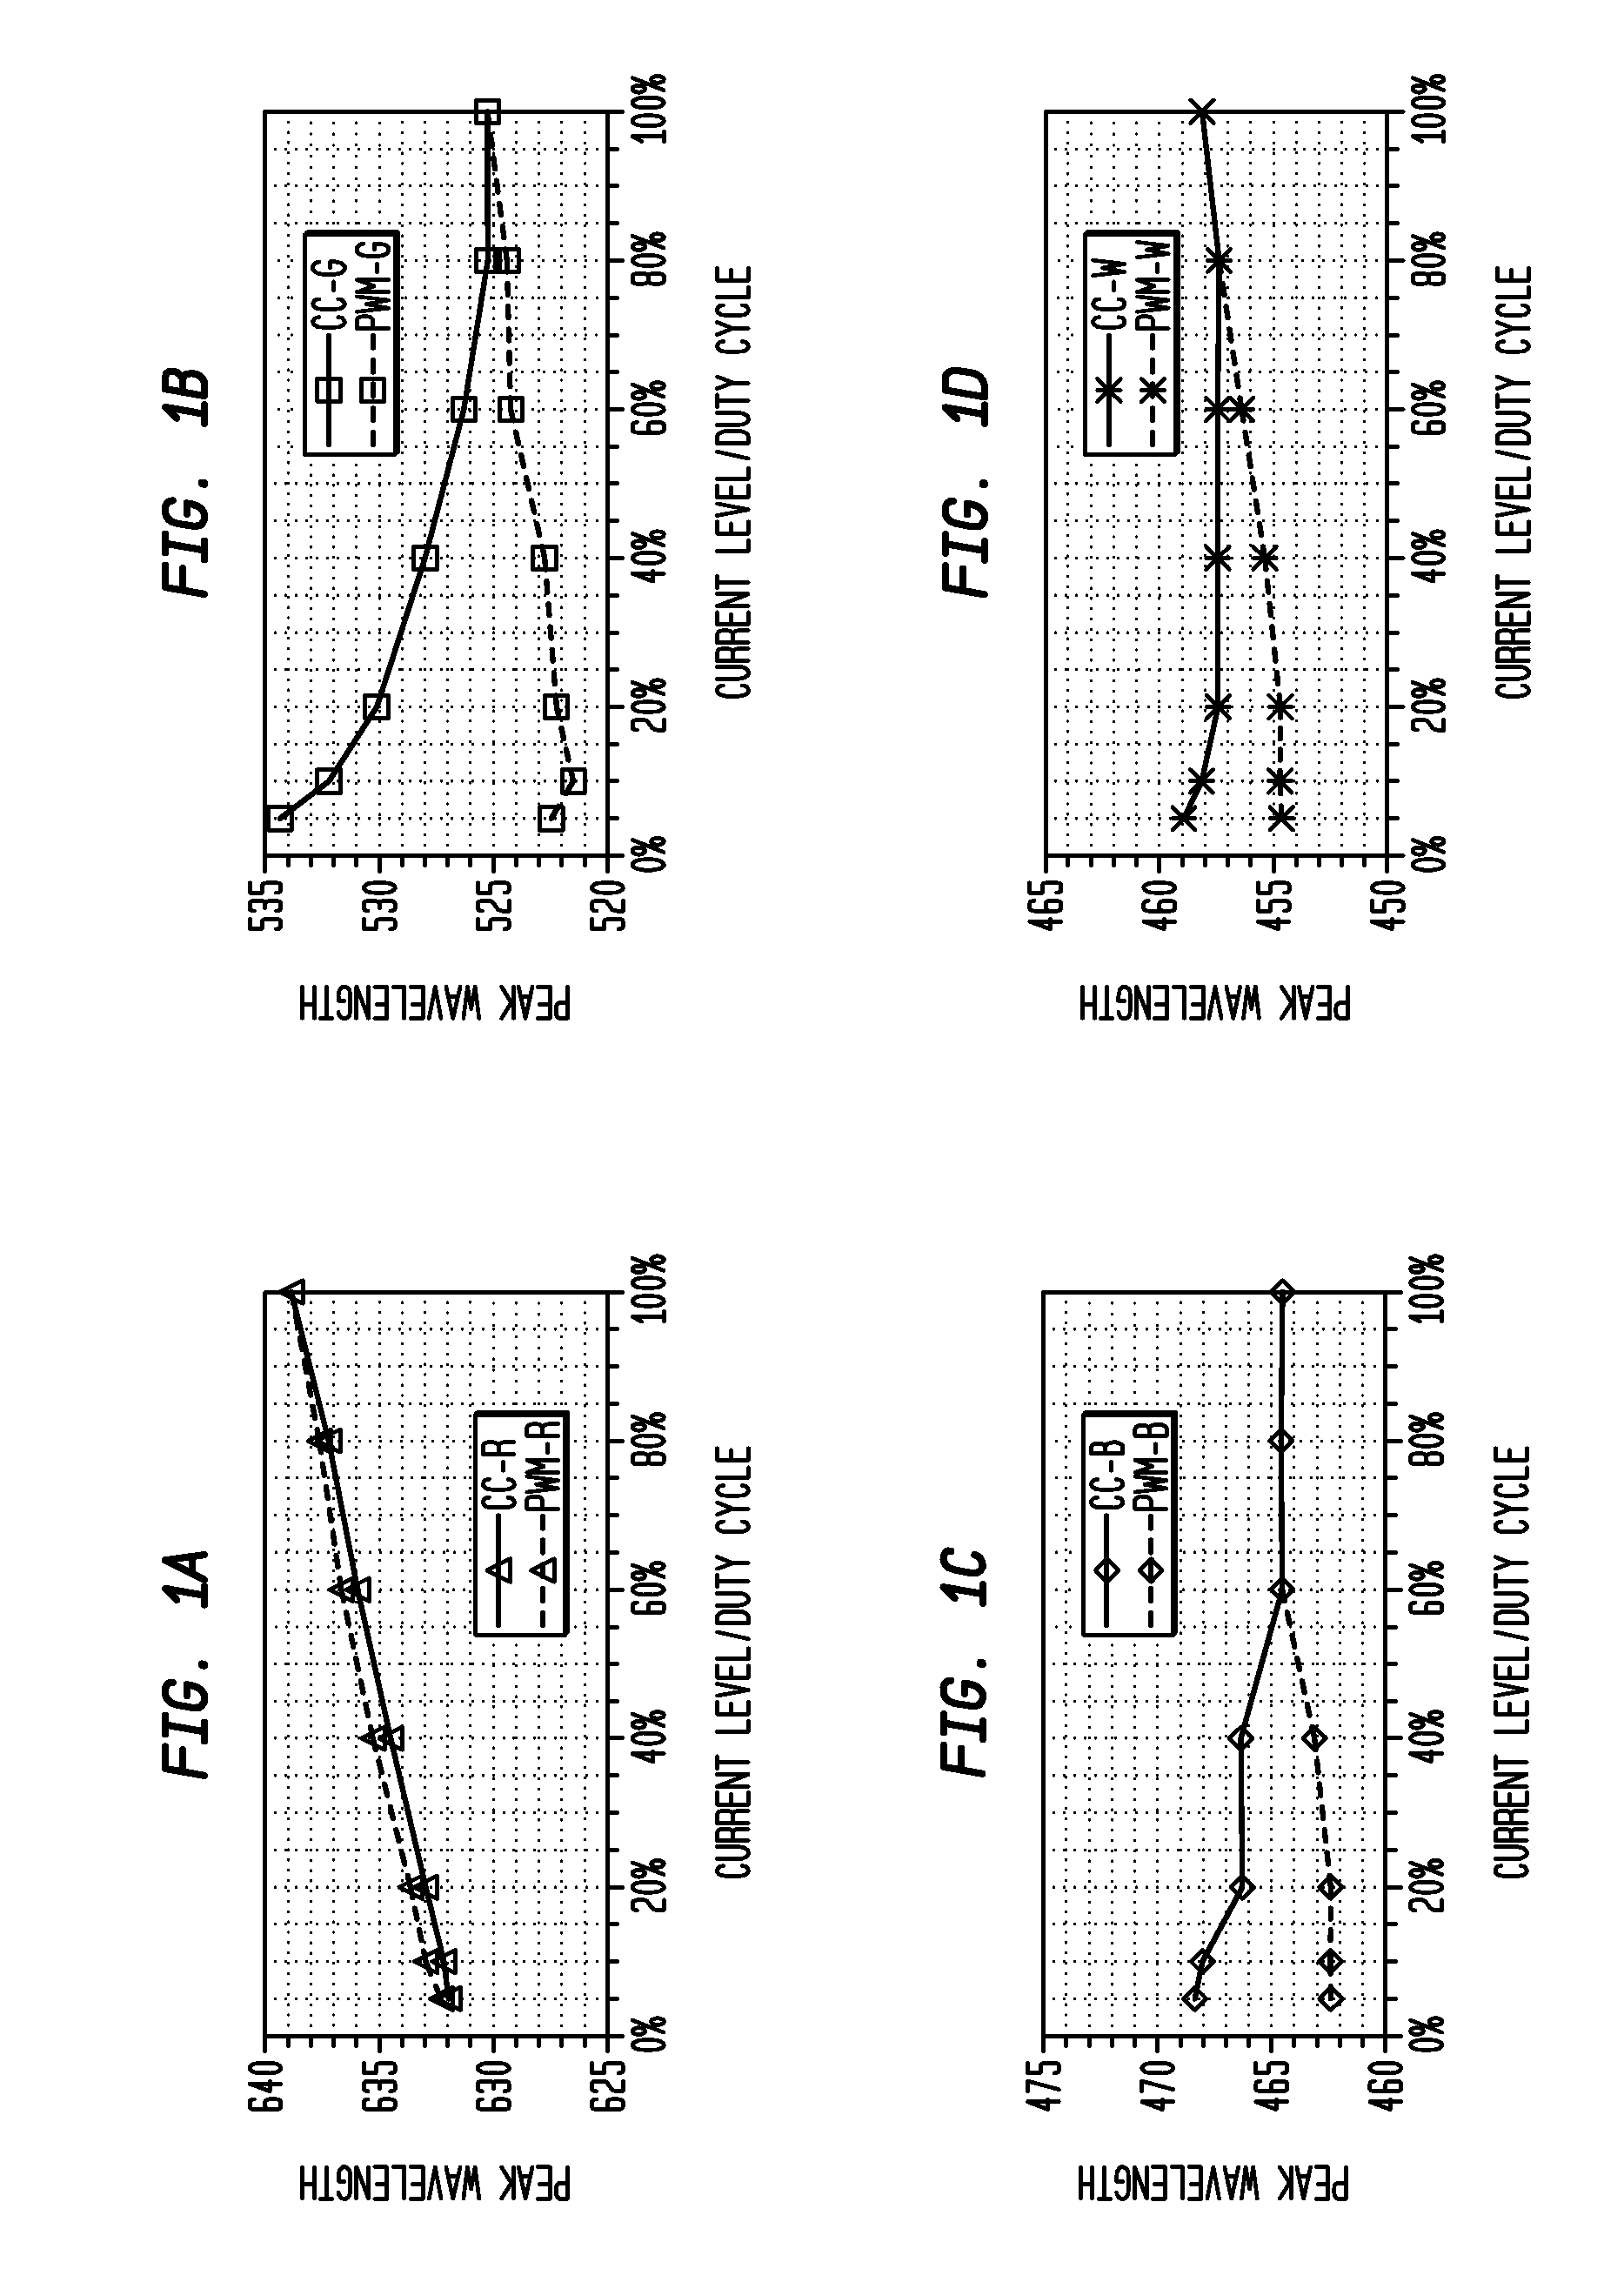 System and method for regulation of solid state lighting